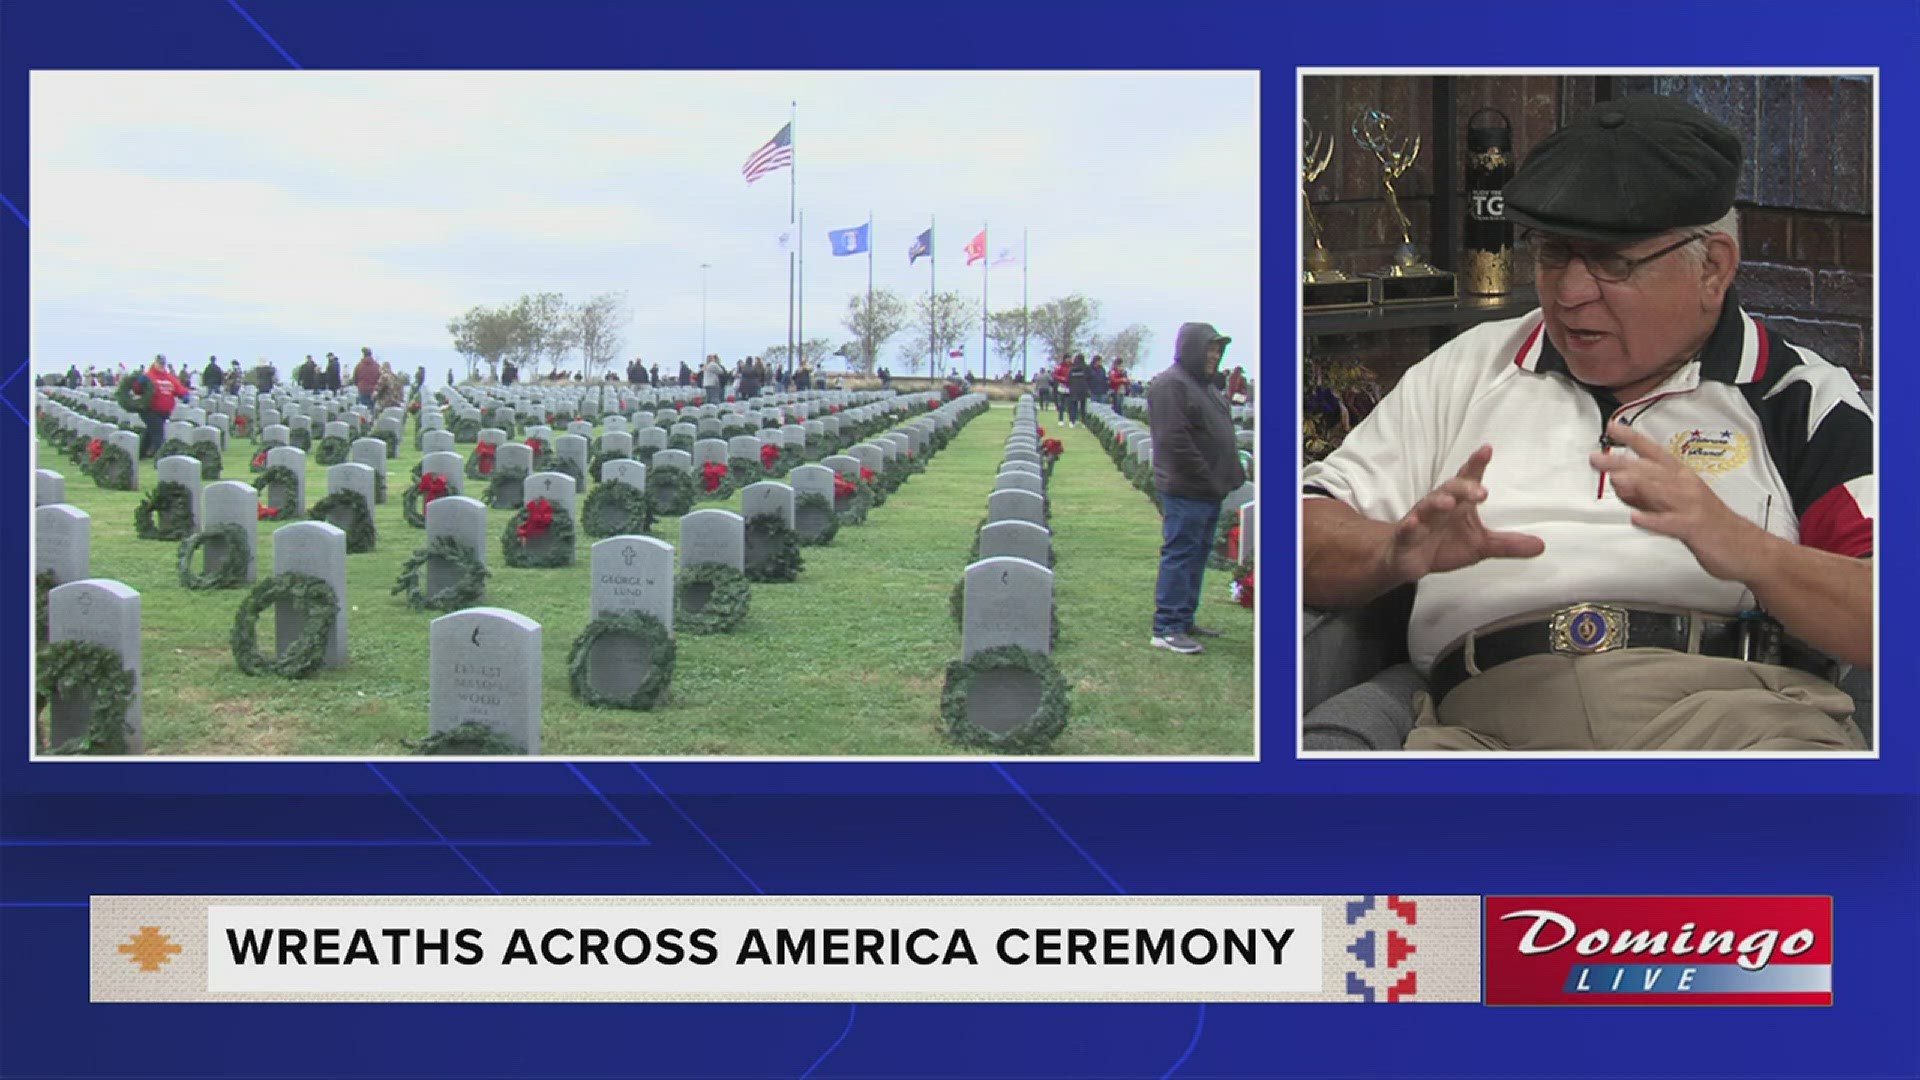 Veterans' advocate Ram Chavez joined us on Domingo Live to discuss the work and dedication that goes into the annual Wreaths Across America Ceremony.